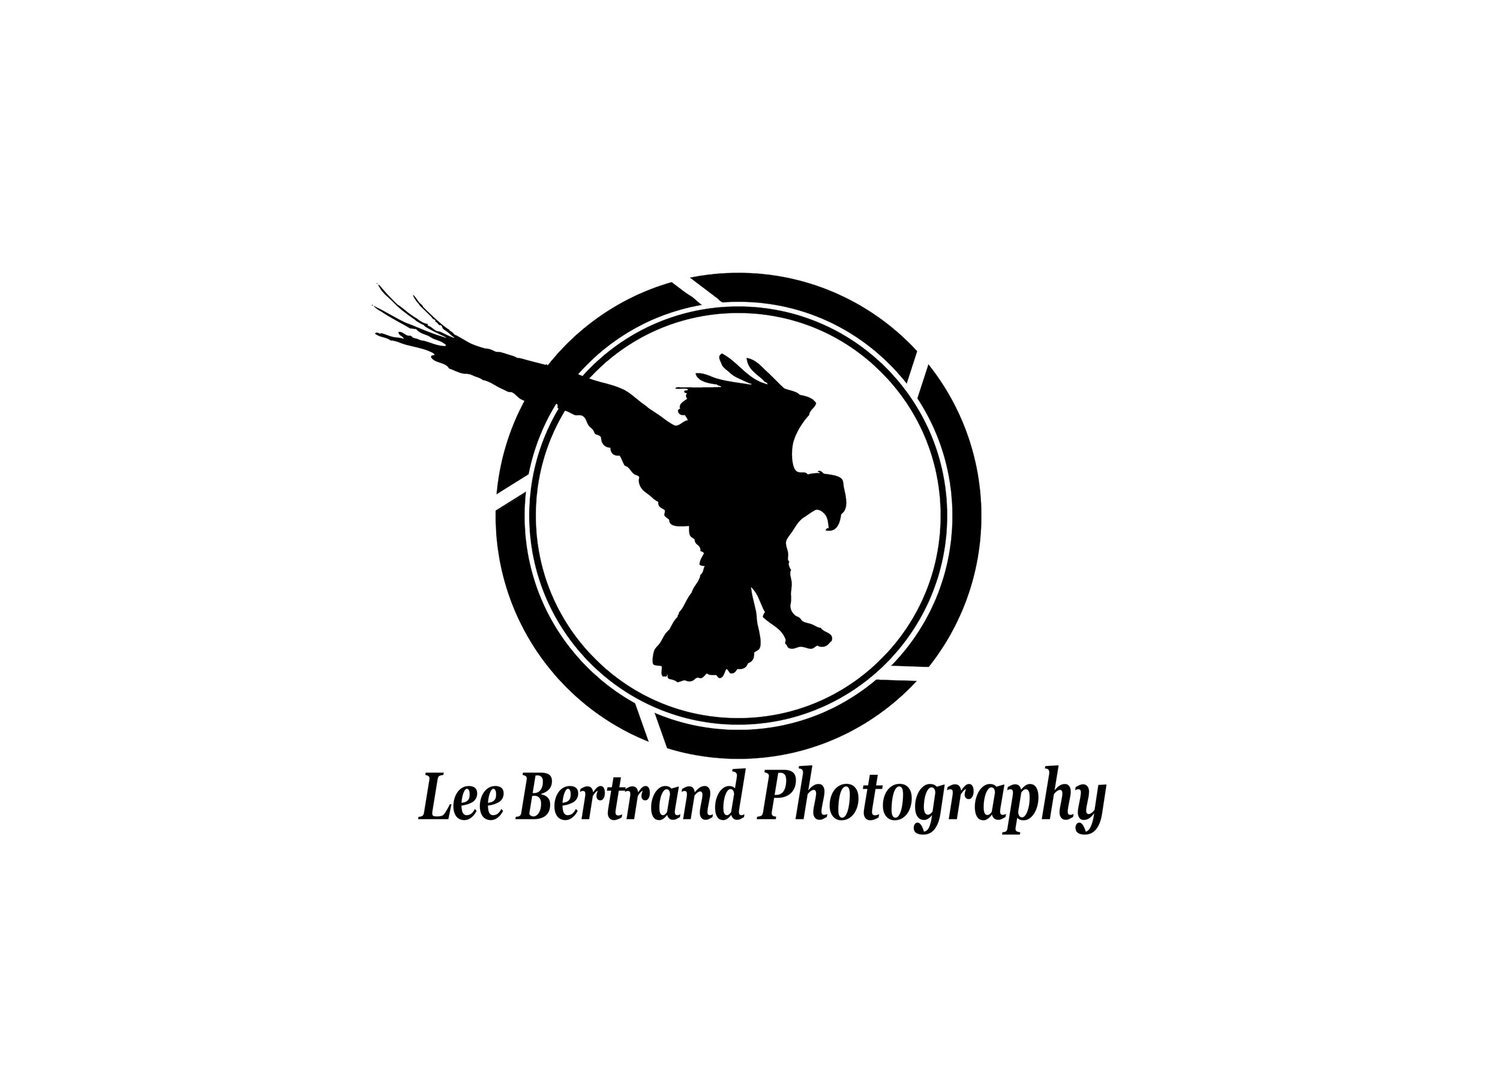 Lee Bertrand Photography and fine art